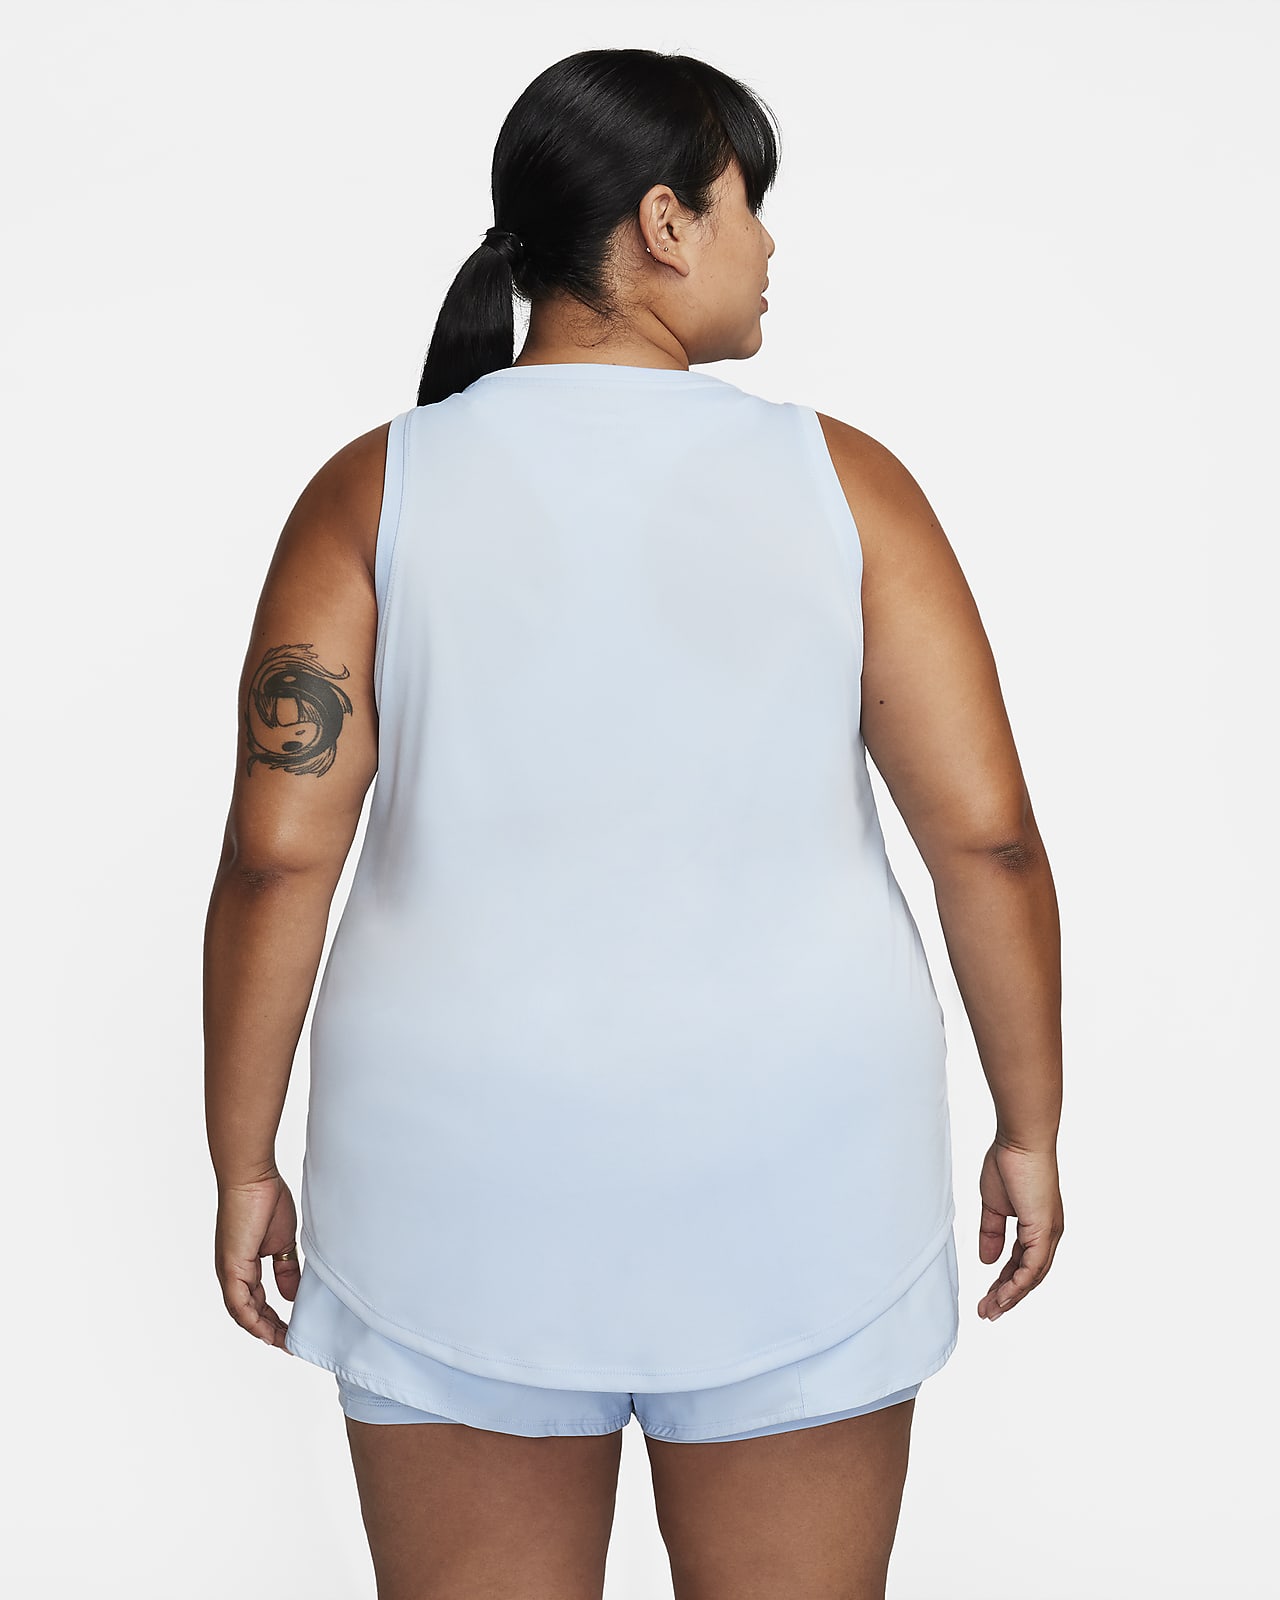 Women's Plus Size Essential Racerback Tank Top - All in Motion